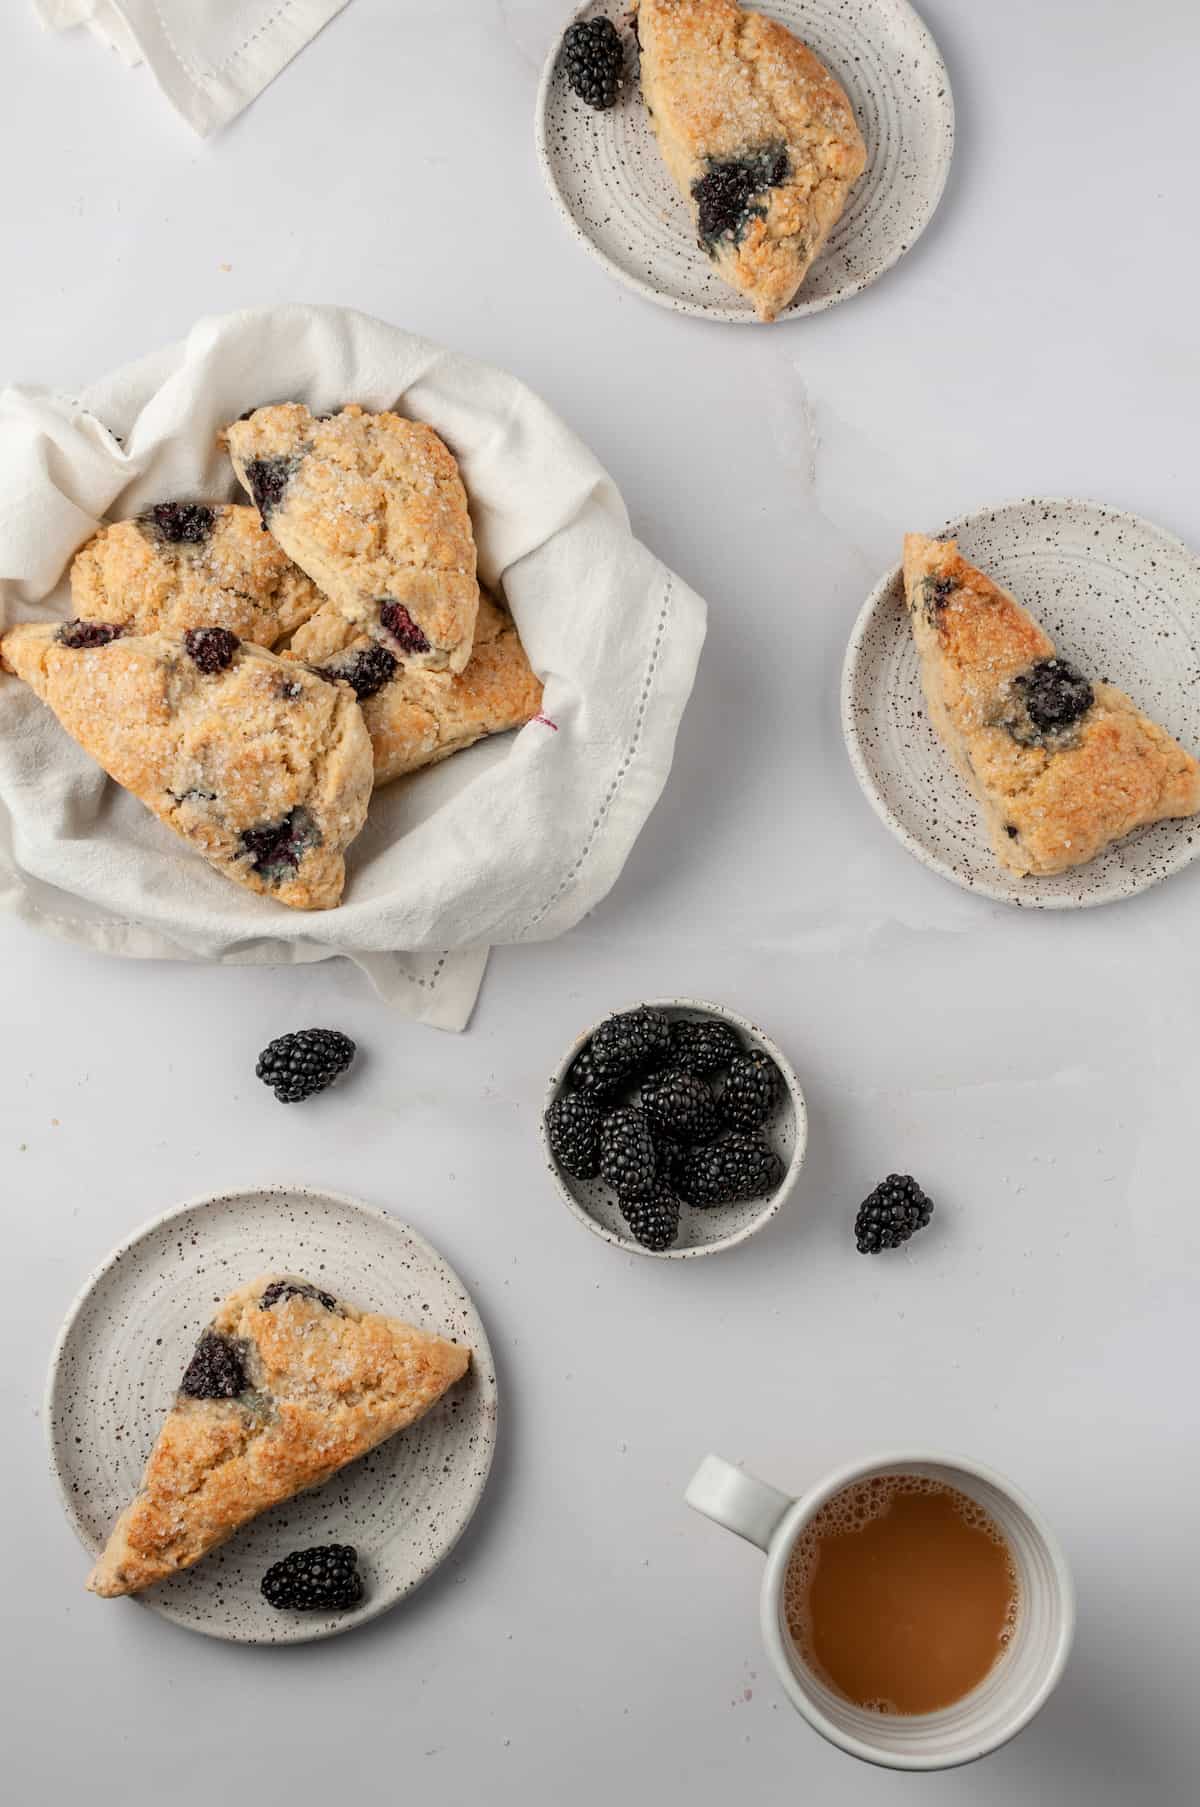 Overhead view of blackberry scones in basket and on plates